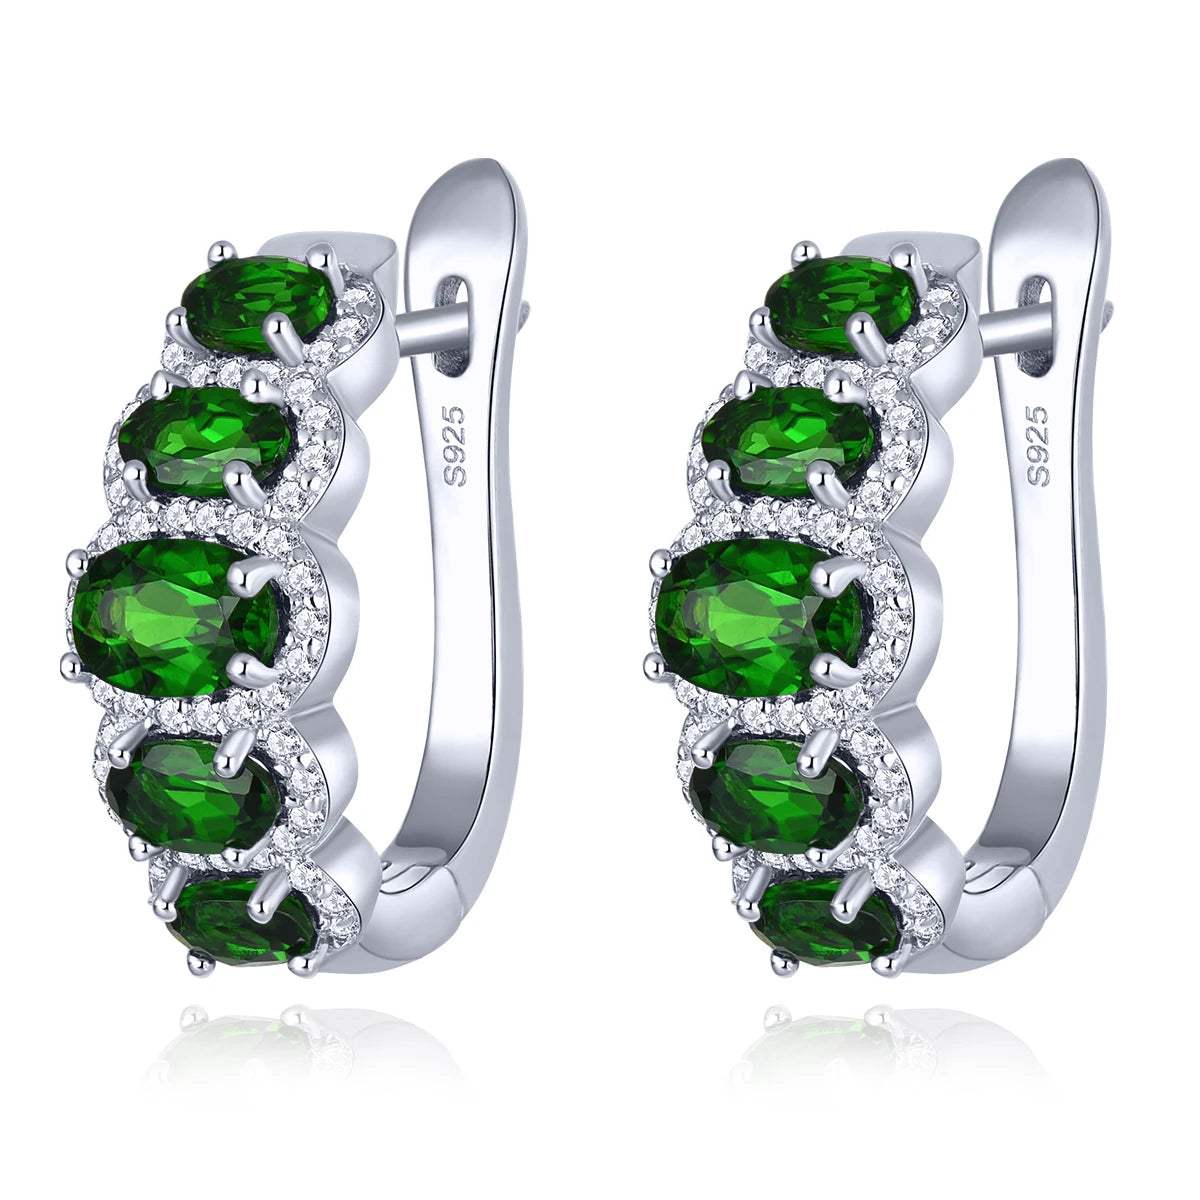 Natural Aquamarine Solid Sterling Silver Clip Earring 2.3 Carats Genuine Aquamarine S925 Earrings Classic Fine Jewelrys Diopside